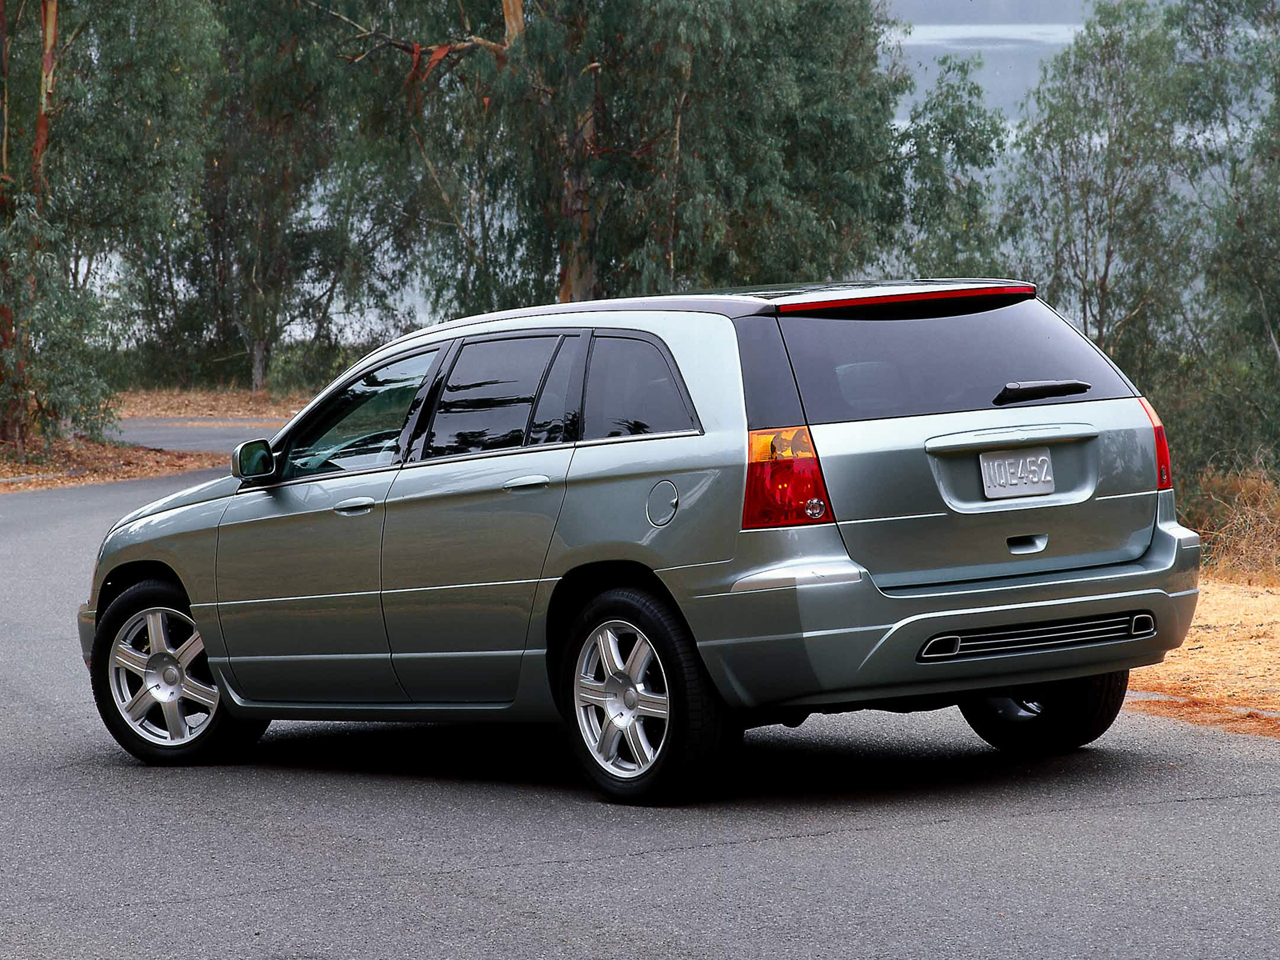 Chrysler Pacifica 2003 Review, Amazing Pictures and